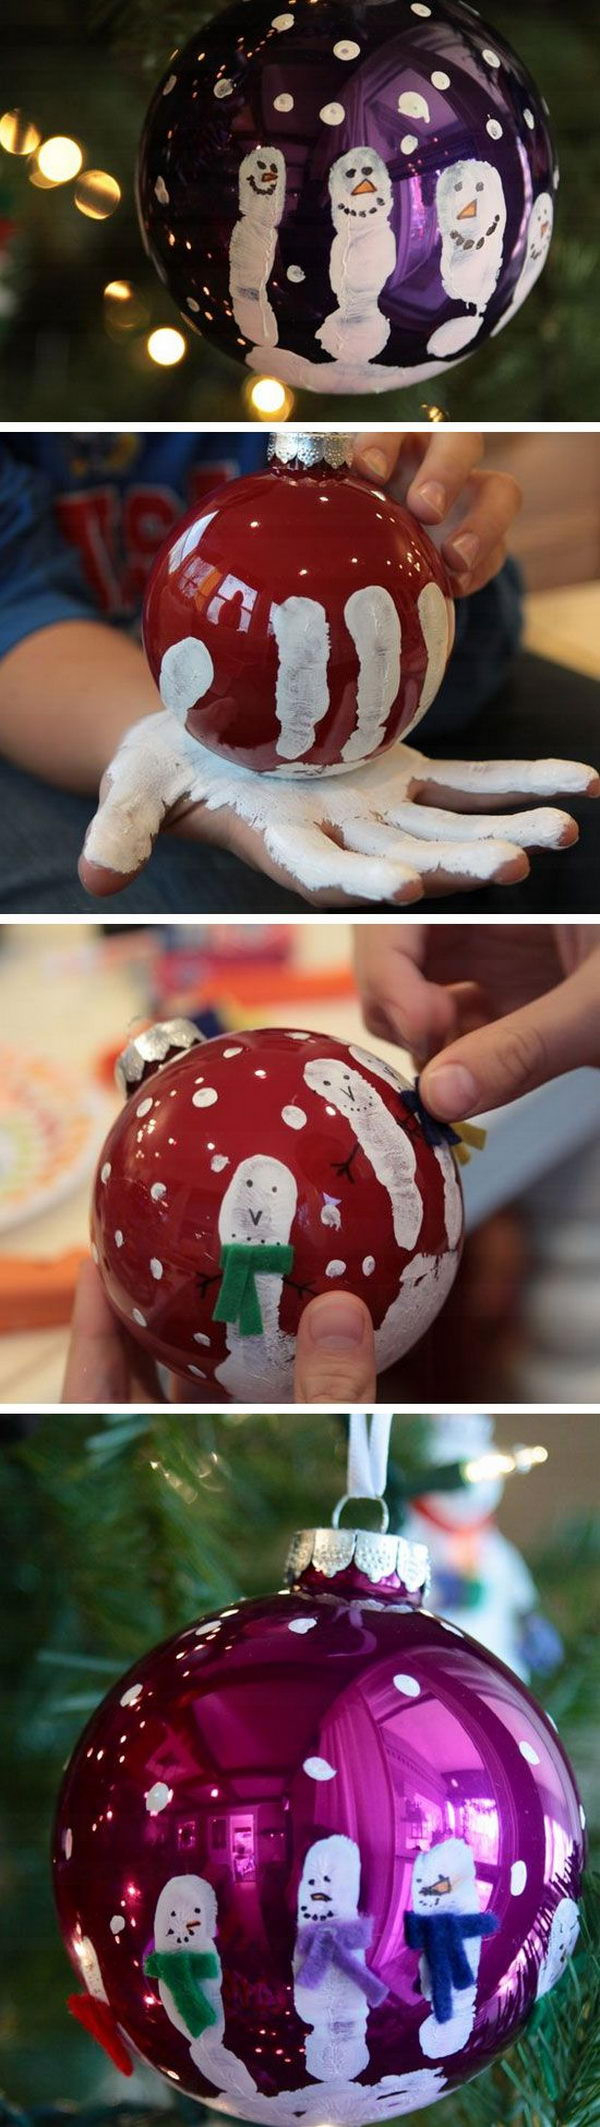 Christmas Decoration Crafts For Kids
 Easy & Creative Christmas DIY Projects That Kids Can Do